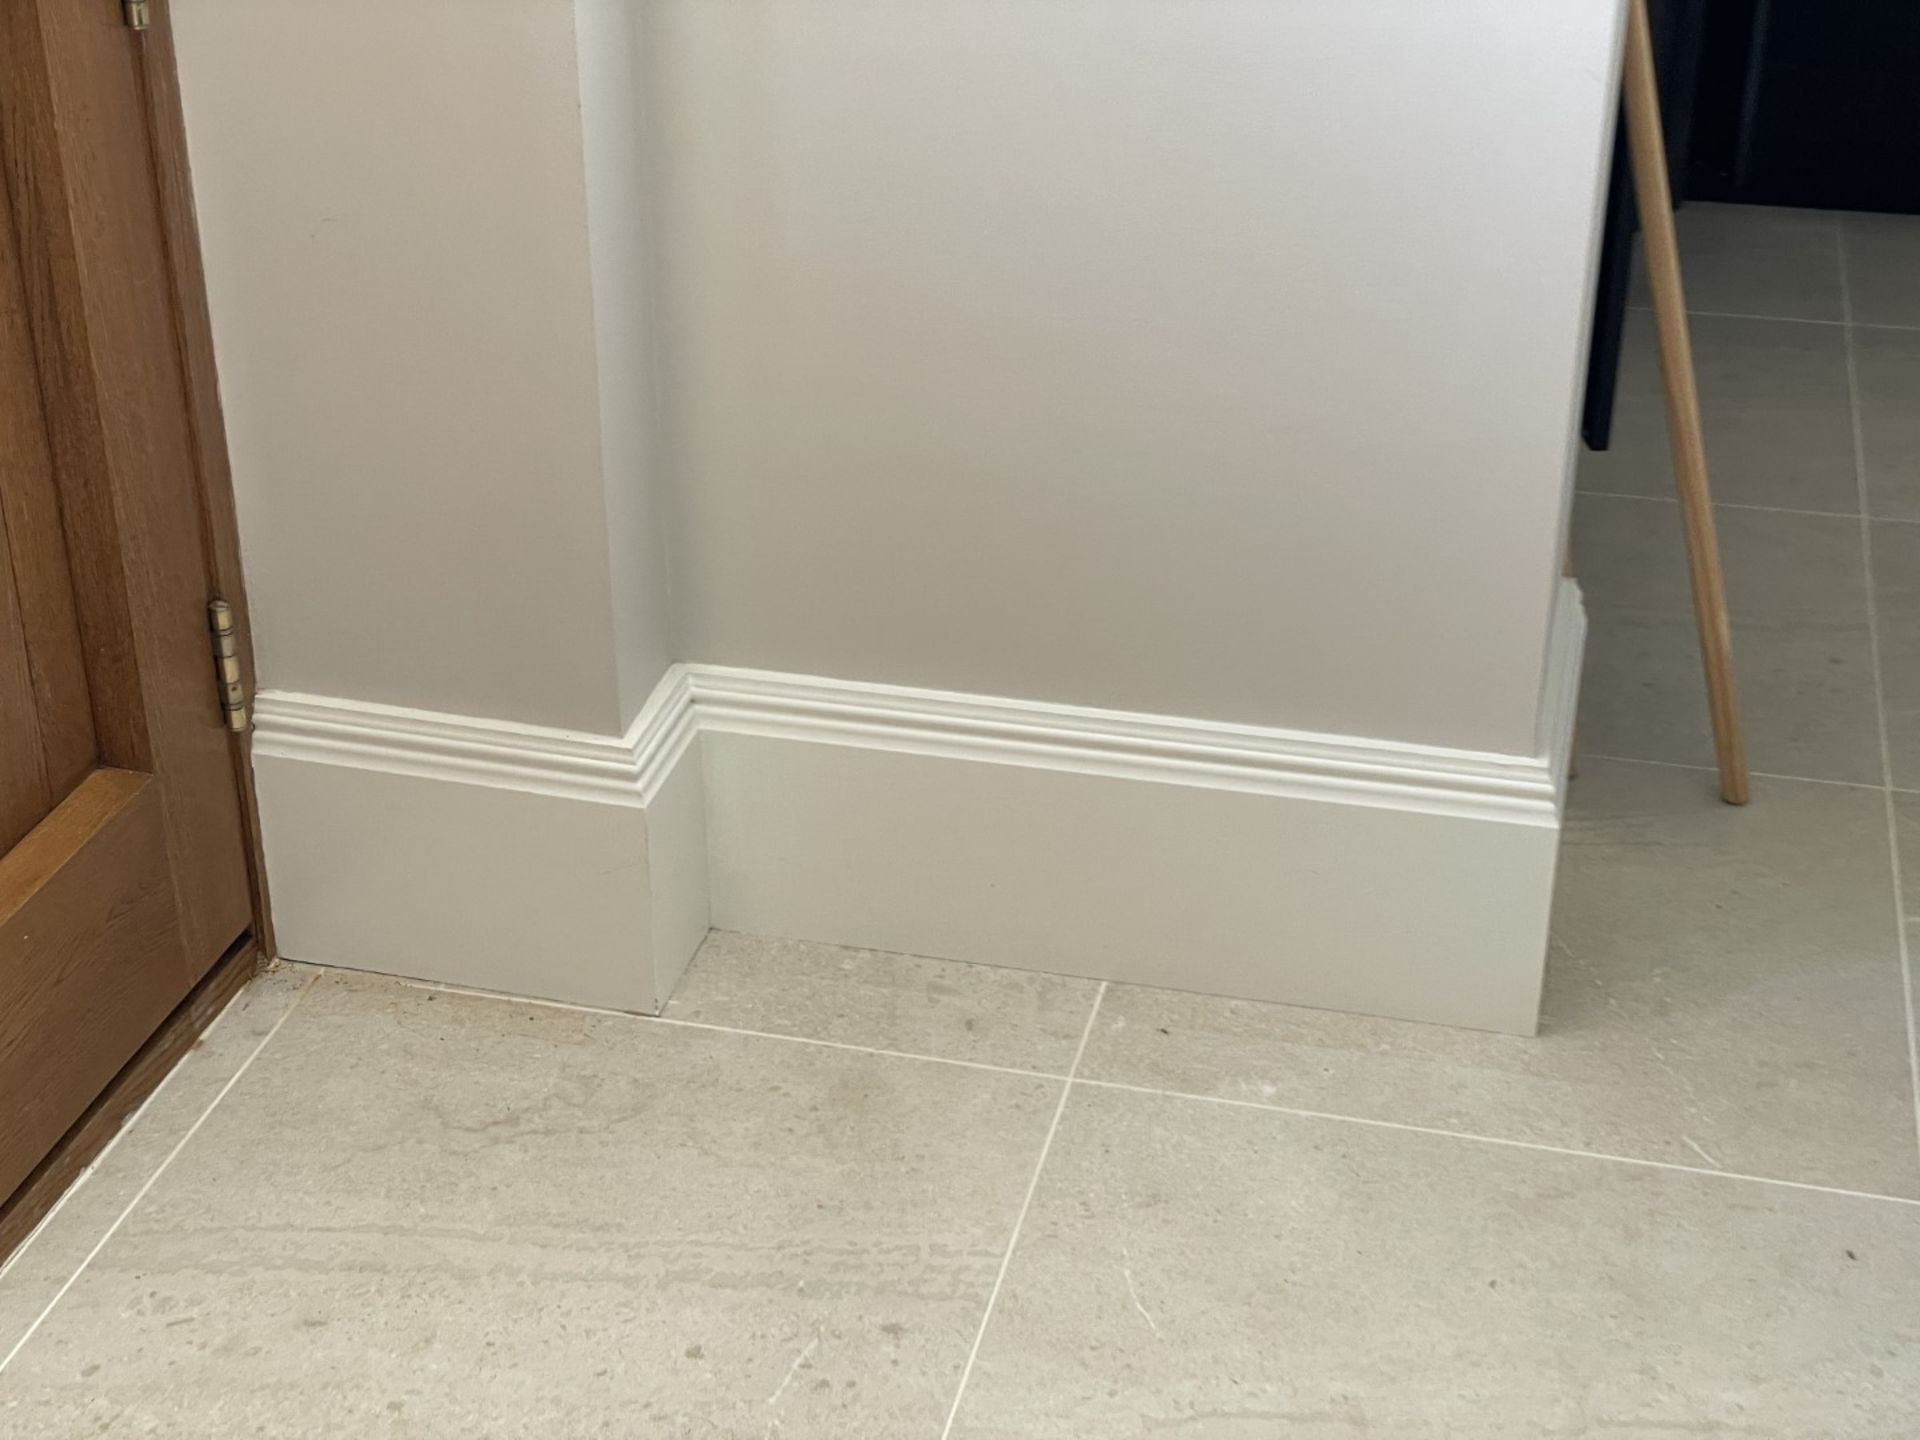 Approximately 10-Metres of Painted Timber Wooden Skirting Boards, In White - Ref: PAN210 - CL896 - - Image 9 of 9